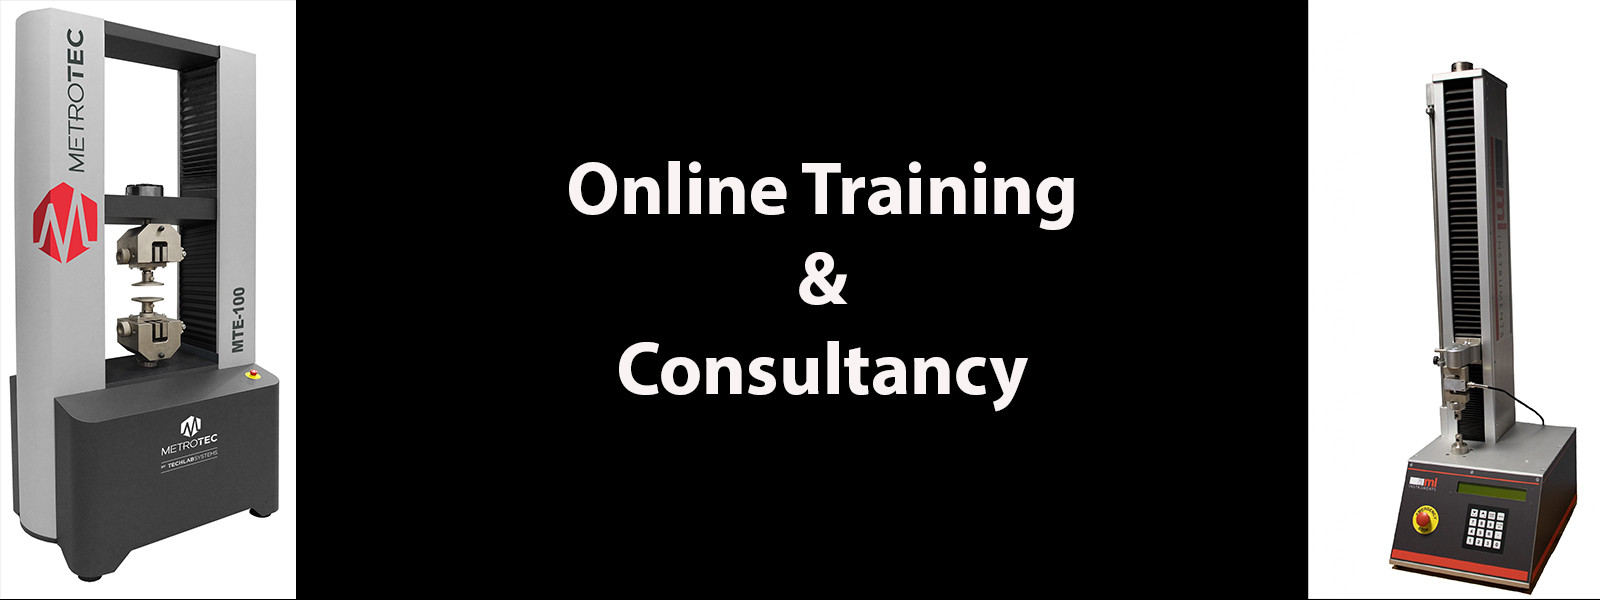 Free Online Training and Consultancy